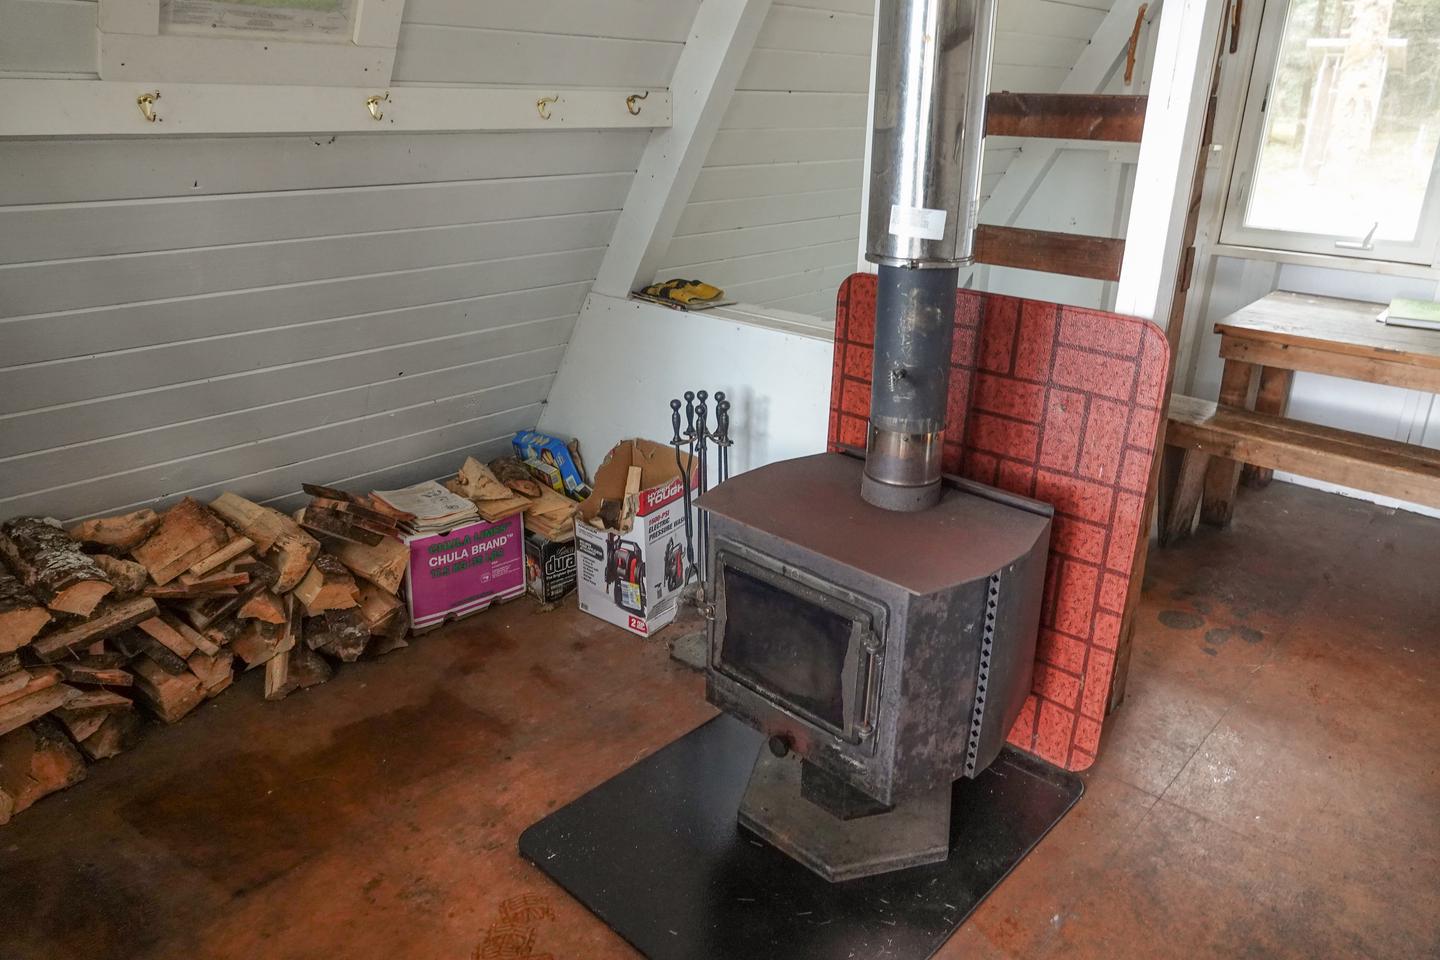 woodstove and woodpile inside the cabinCabin interior and woodstove